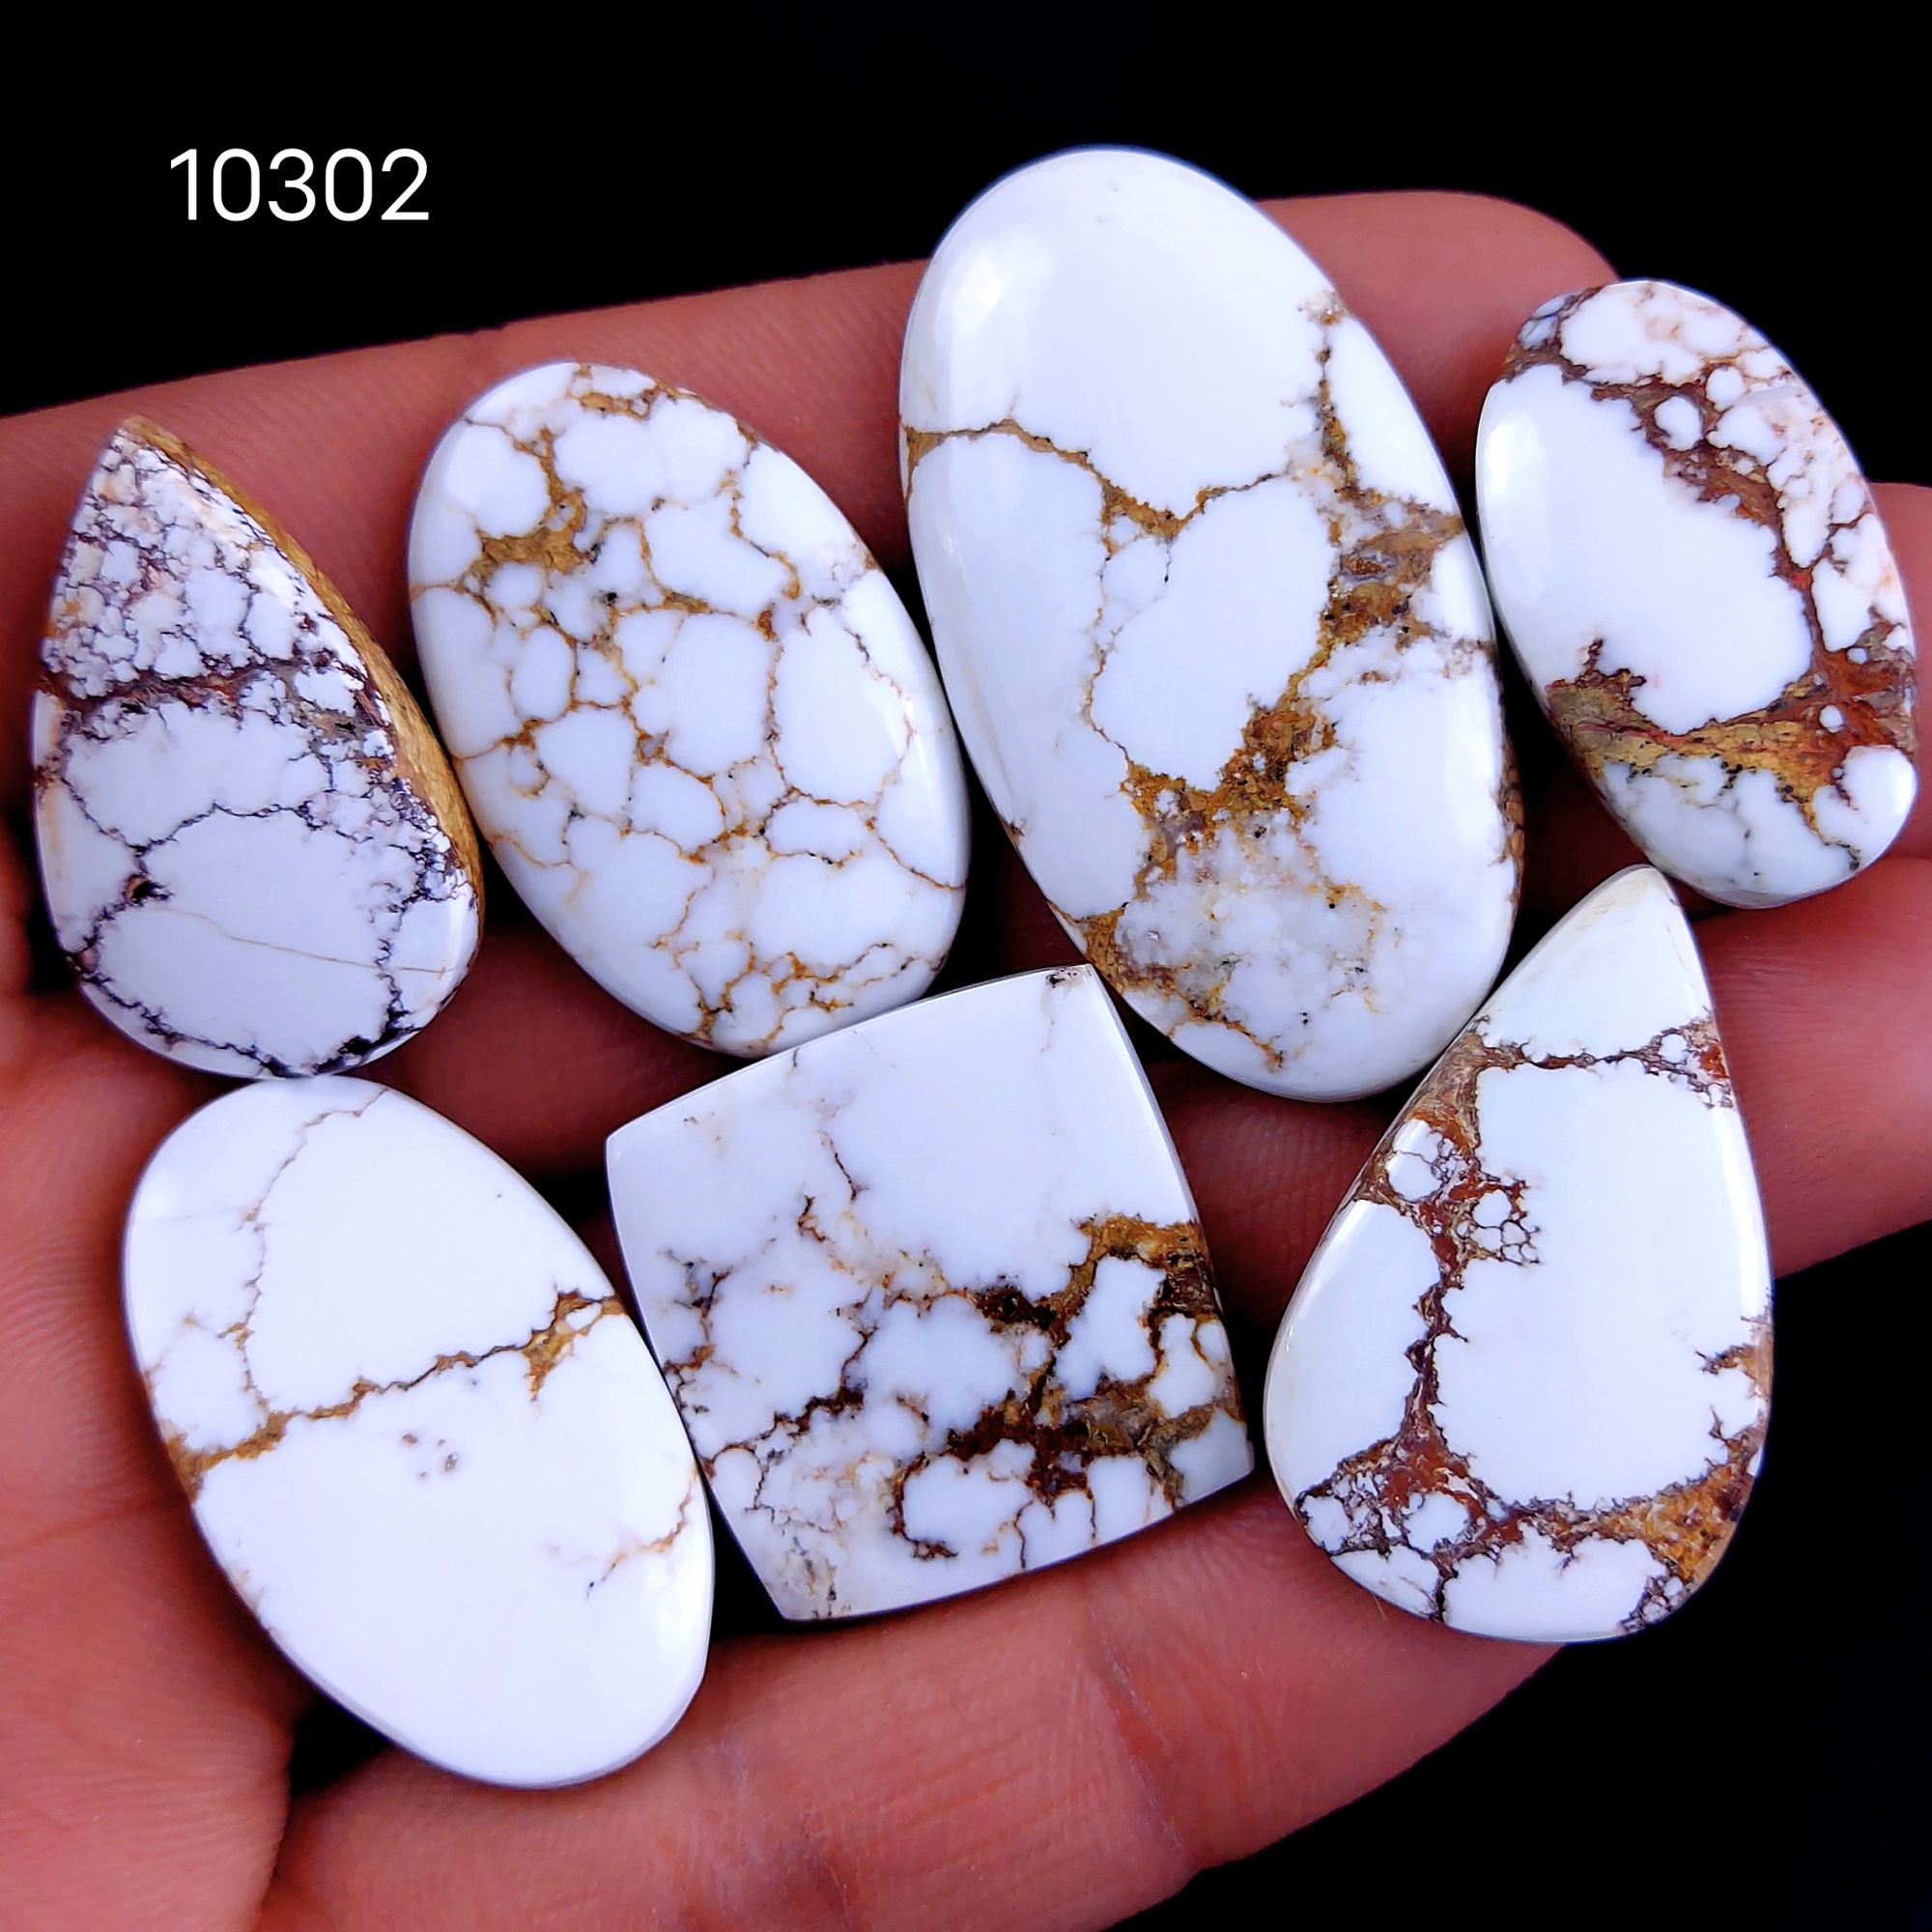 7Pc 192Cts Natural Wild Horse Magnesite Turquoise Cabochon Polished Loose Gemstone Flat Back Multi Jewelry Making Crystal  40x22 26x15mm #10302